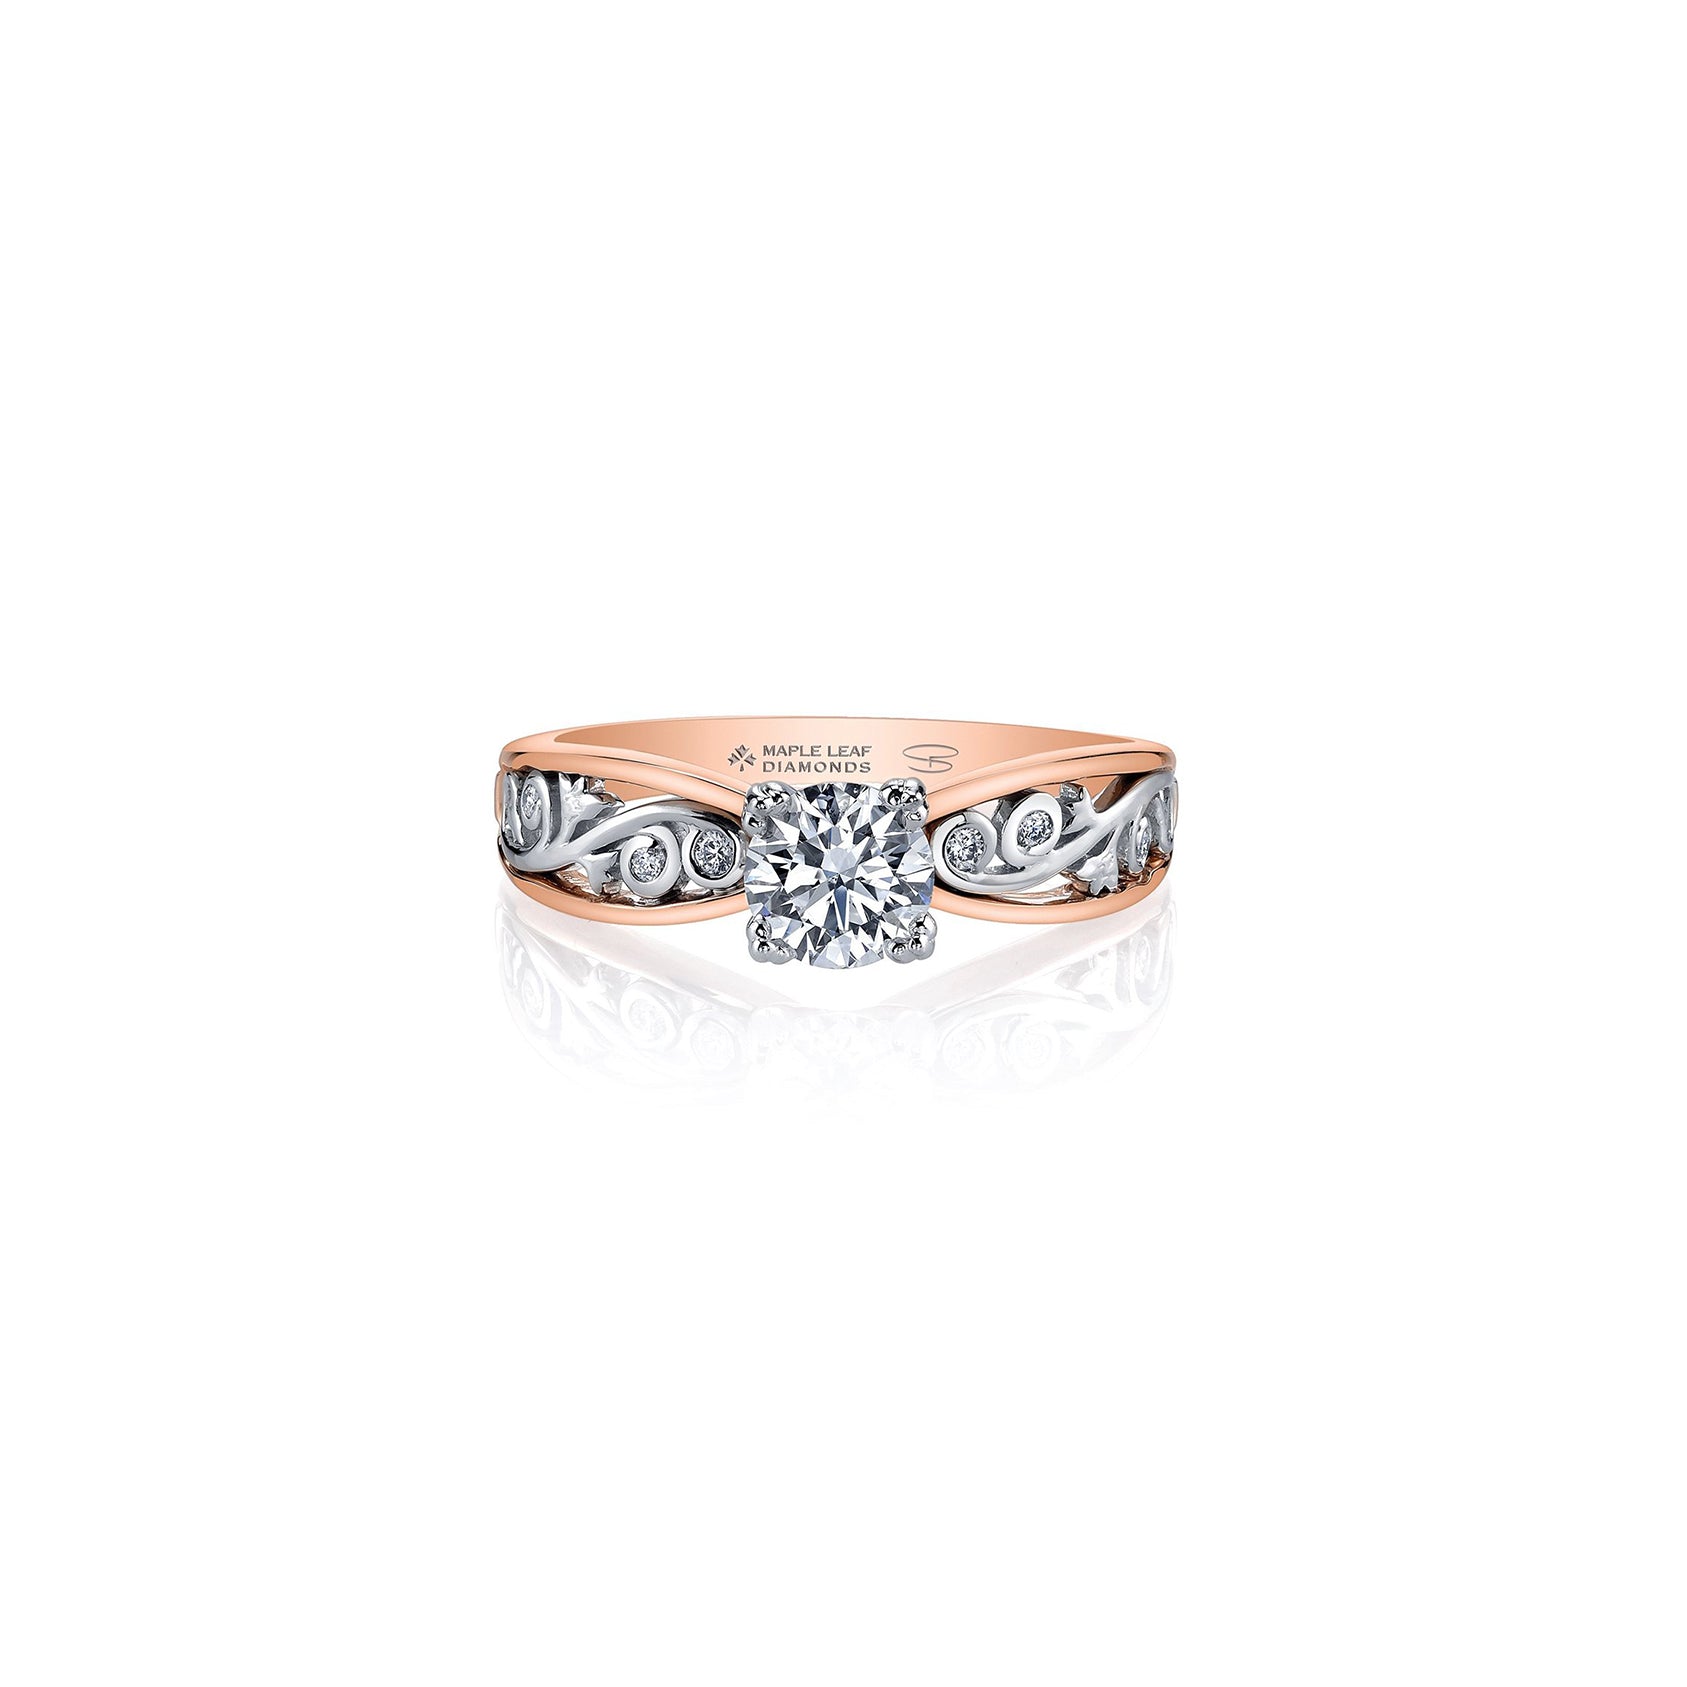 Crafted in rose and white 18KT Canadian Certified Gold, this ring features an infinity symbol shaped band with a diamond set rose vine design and a round brilliant-cut centre diamond.